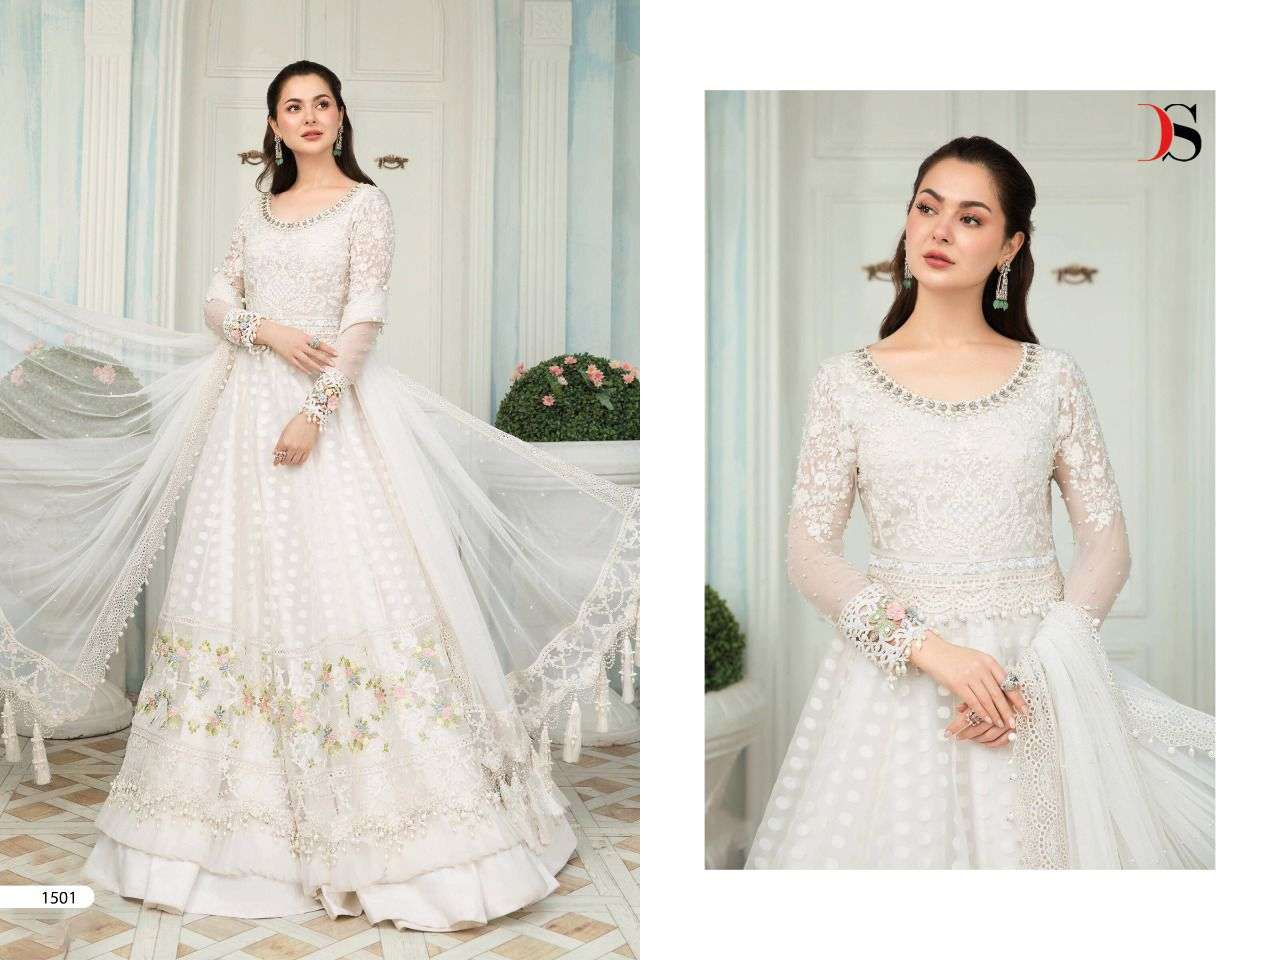 DEESPSY SUITS PRESENTS MARIA B 22 GEORGETTE EMBROIDERY WHOLESALE PAKISTANI SUIT